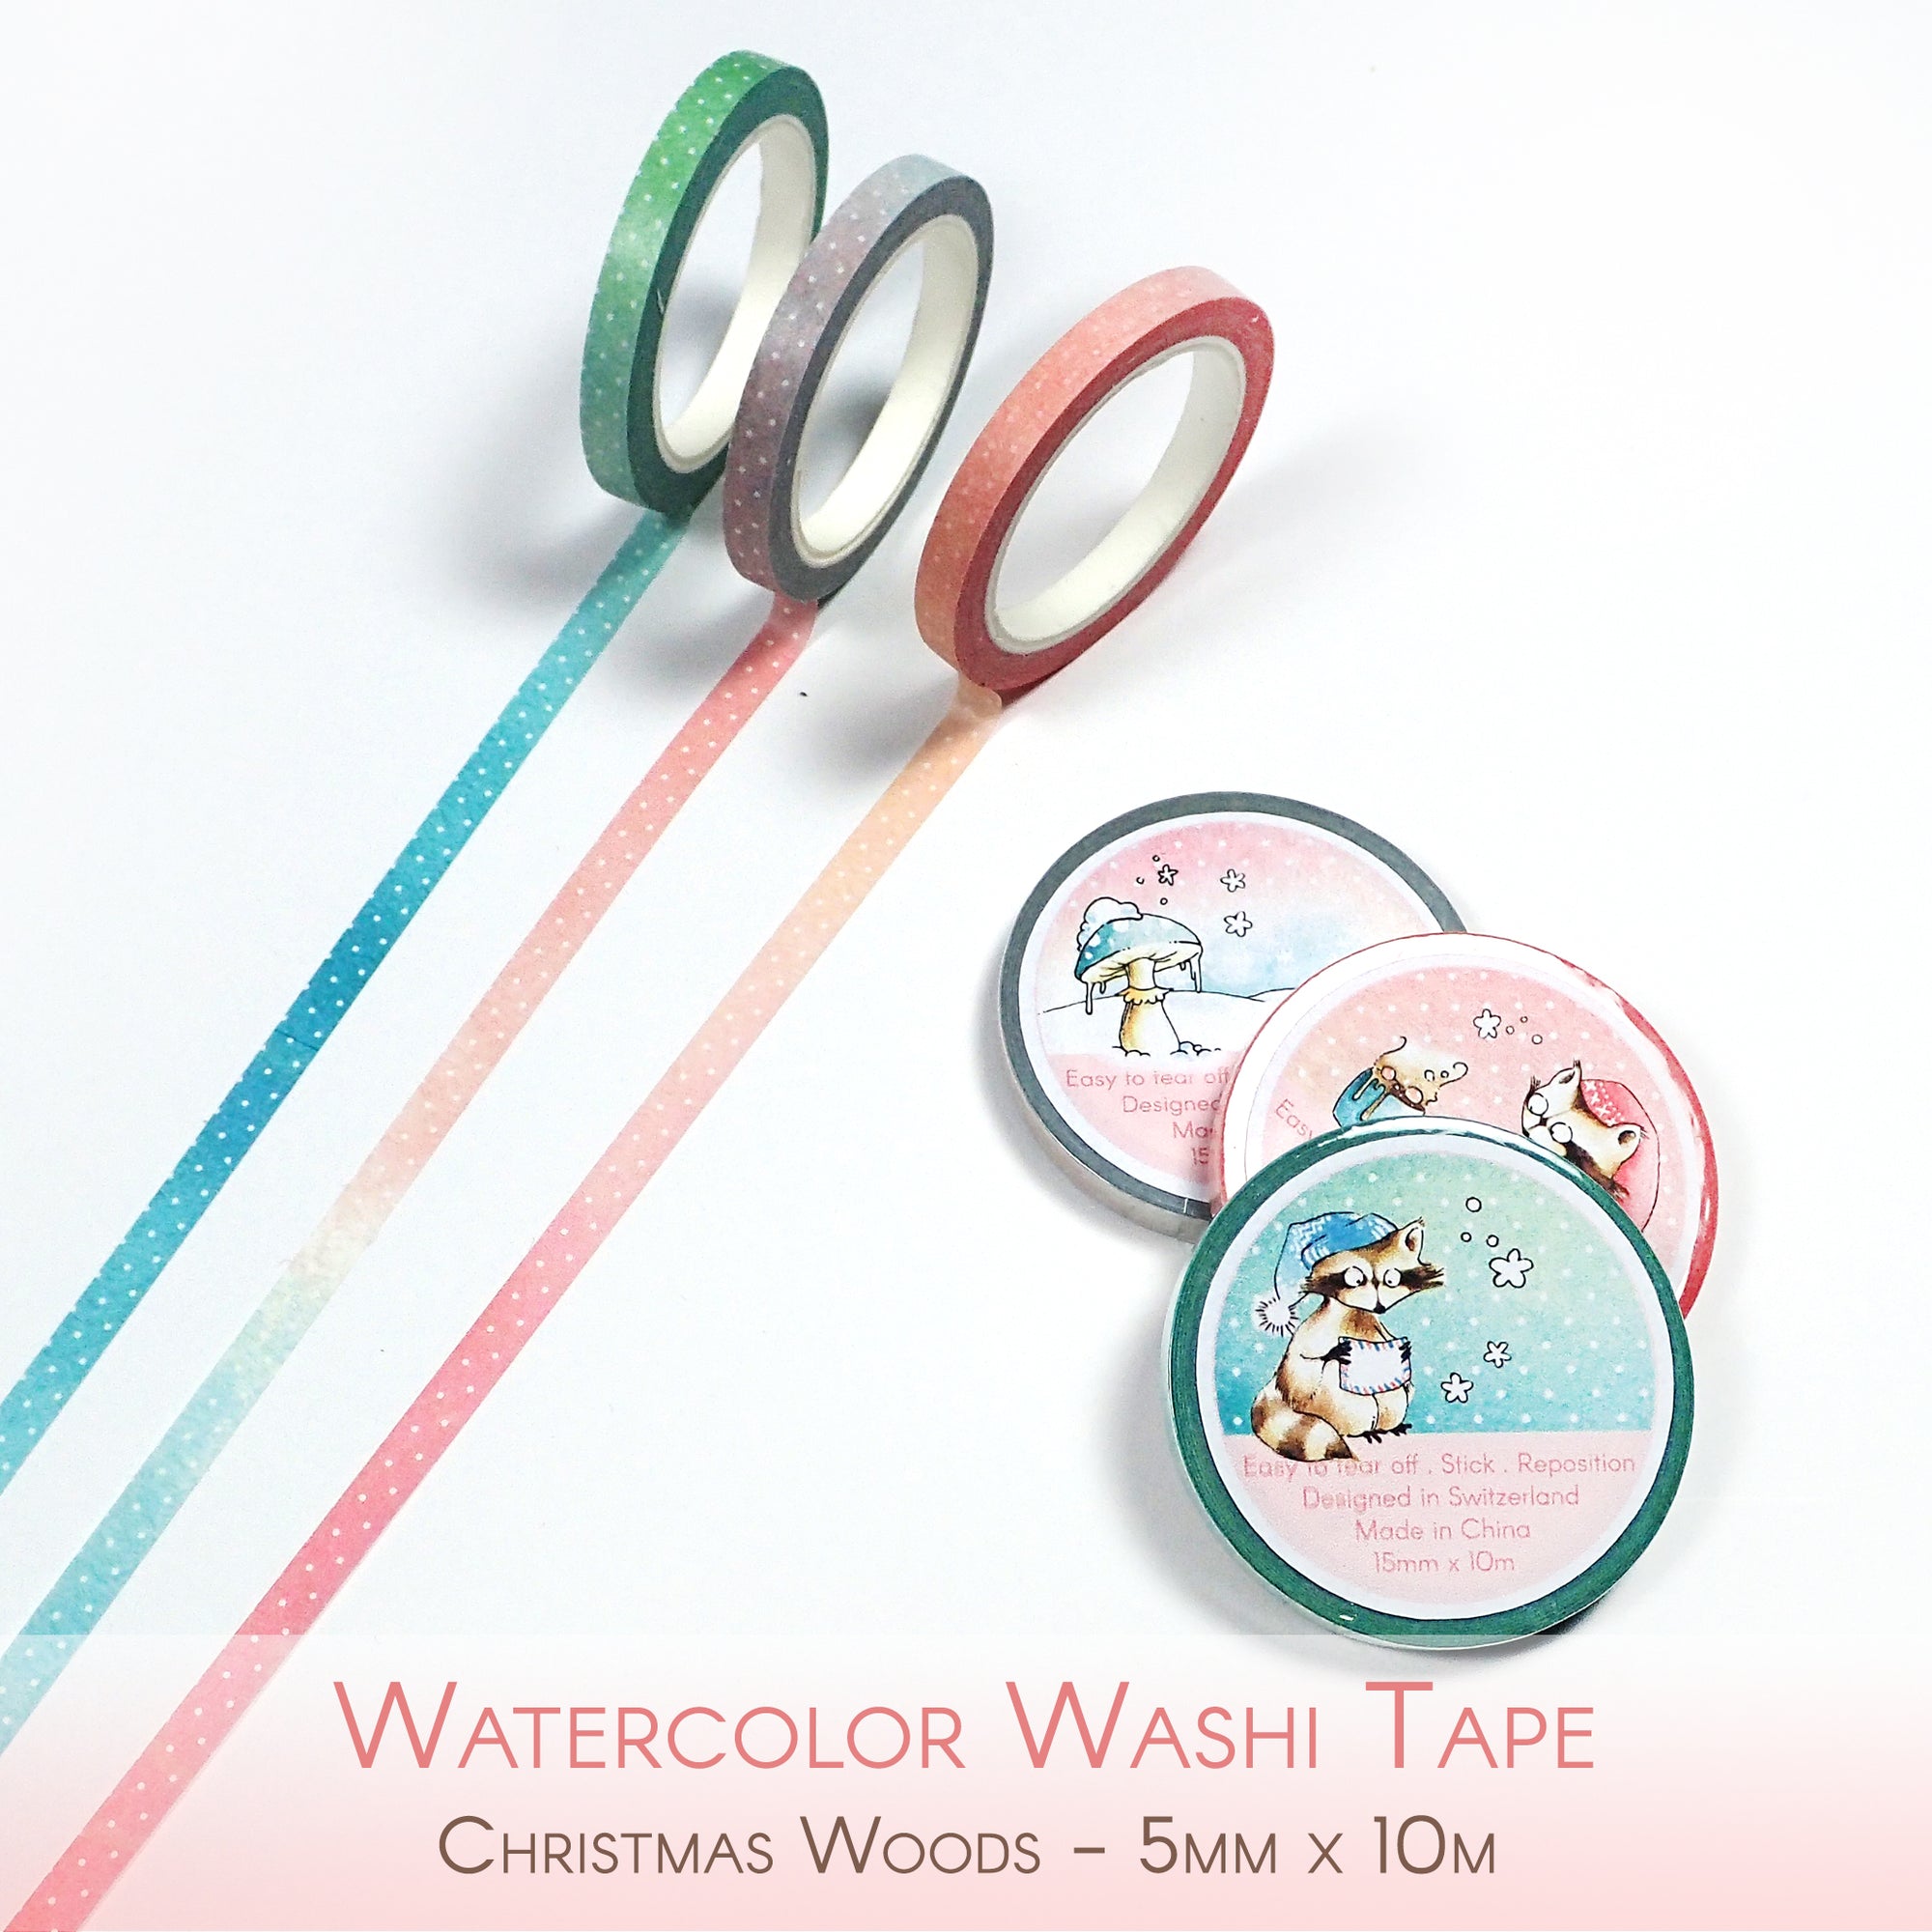 Thin watercolor washi tapes for Christmas Decorations